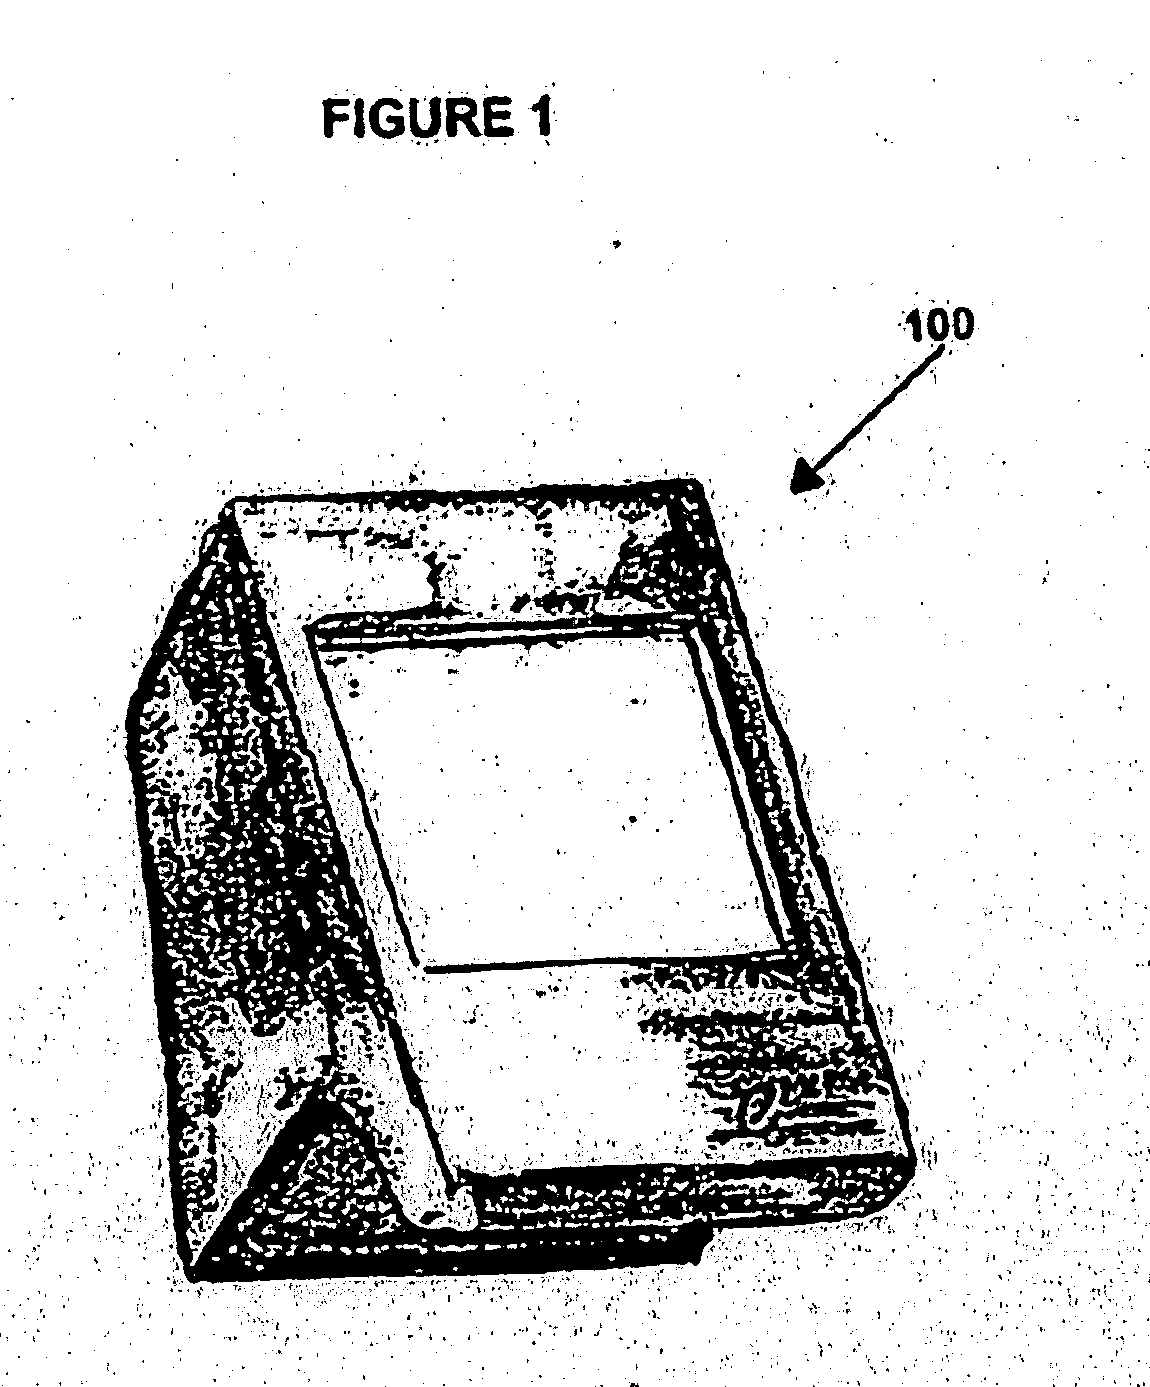 Apparatus and method for detecting human fecal contamination on hands and other objects using an illumination imaging device